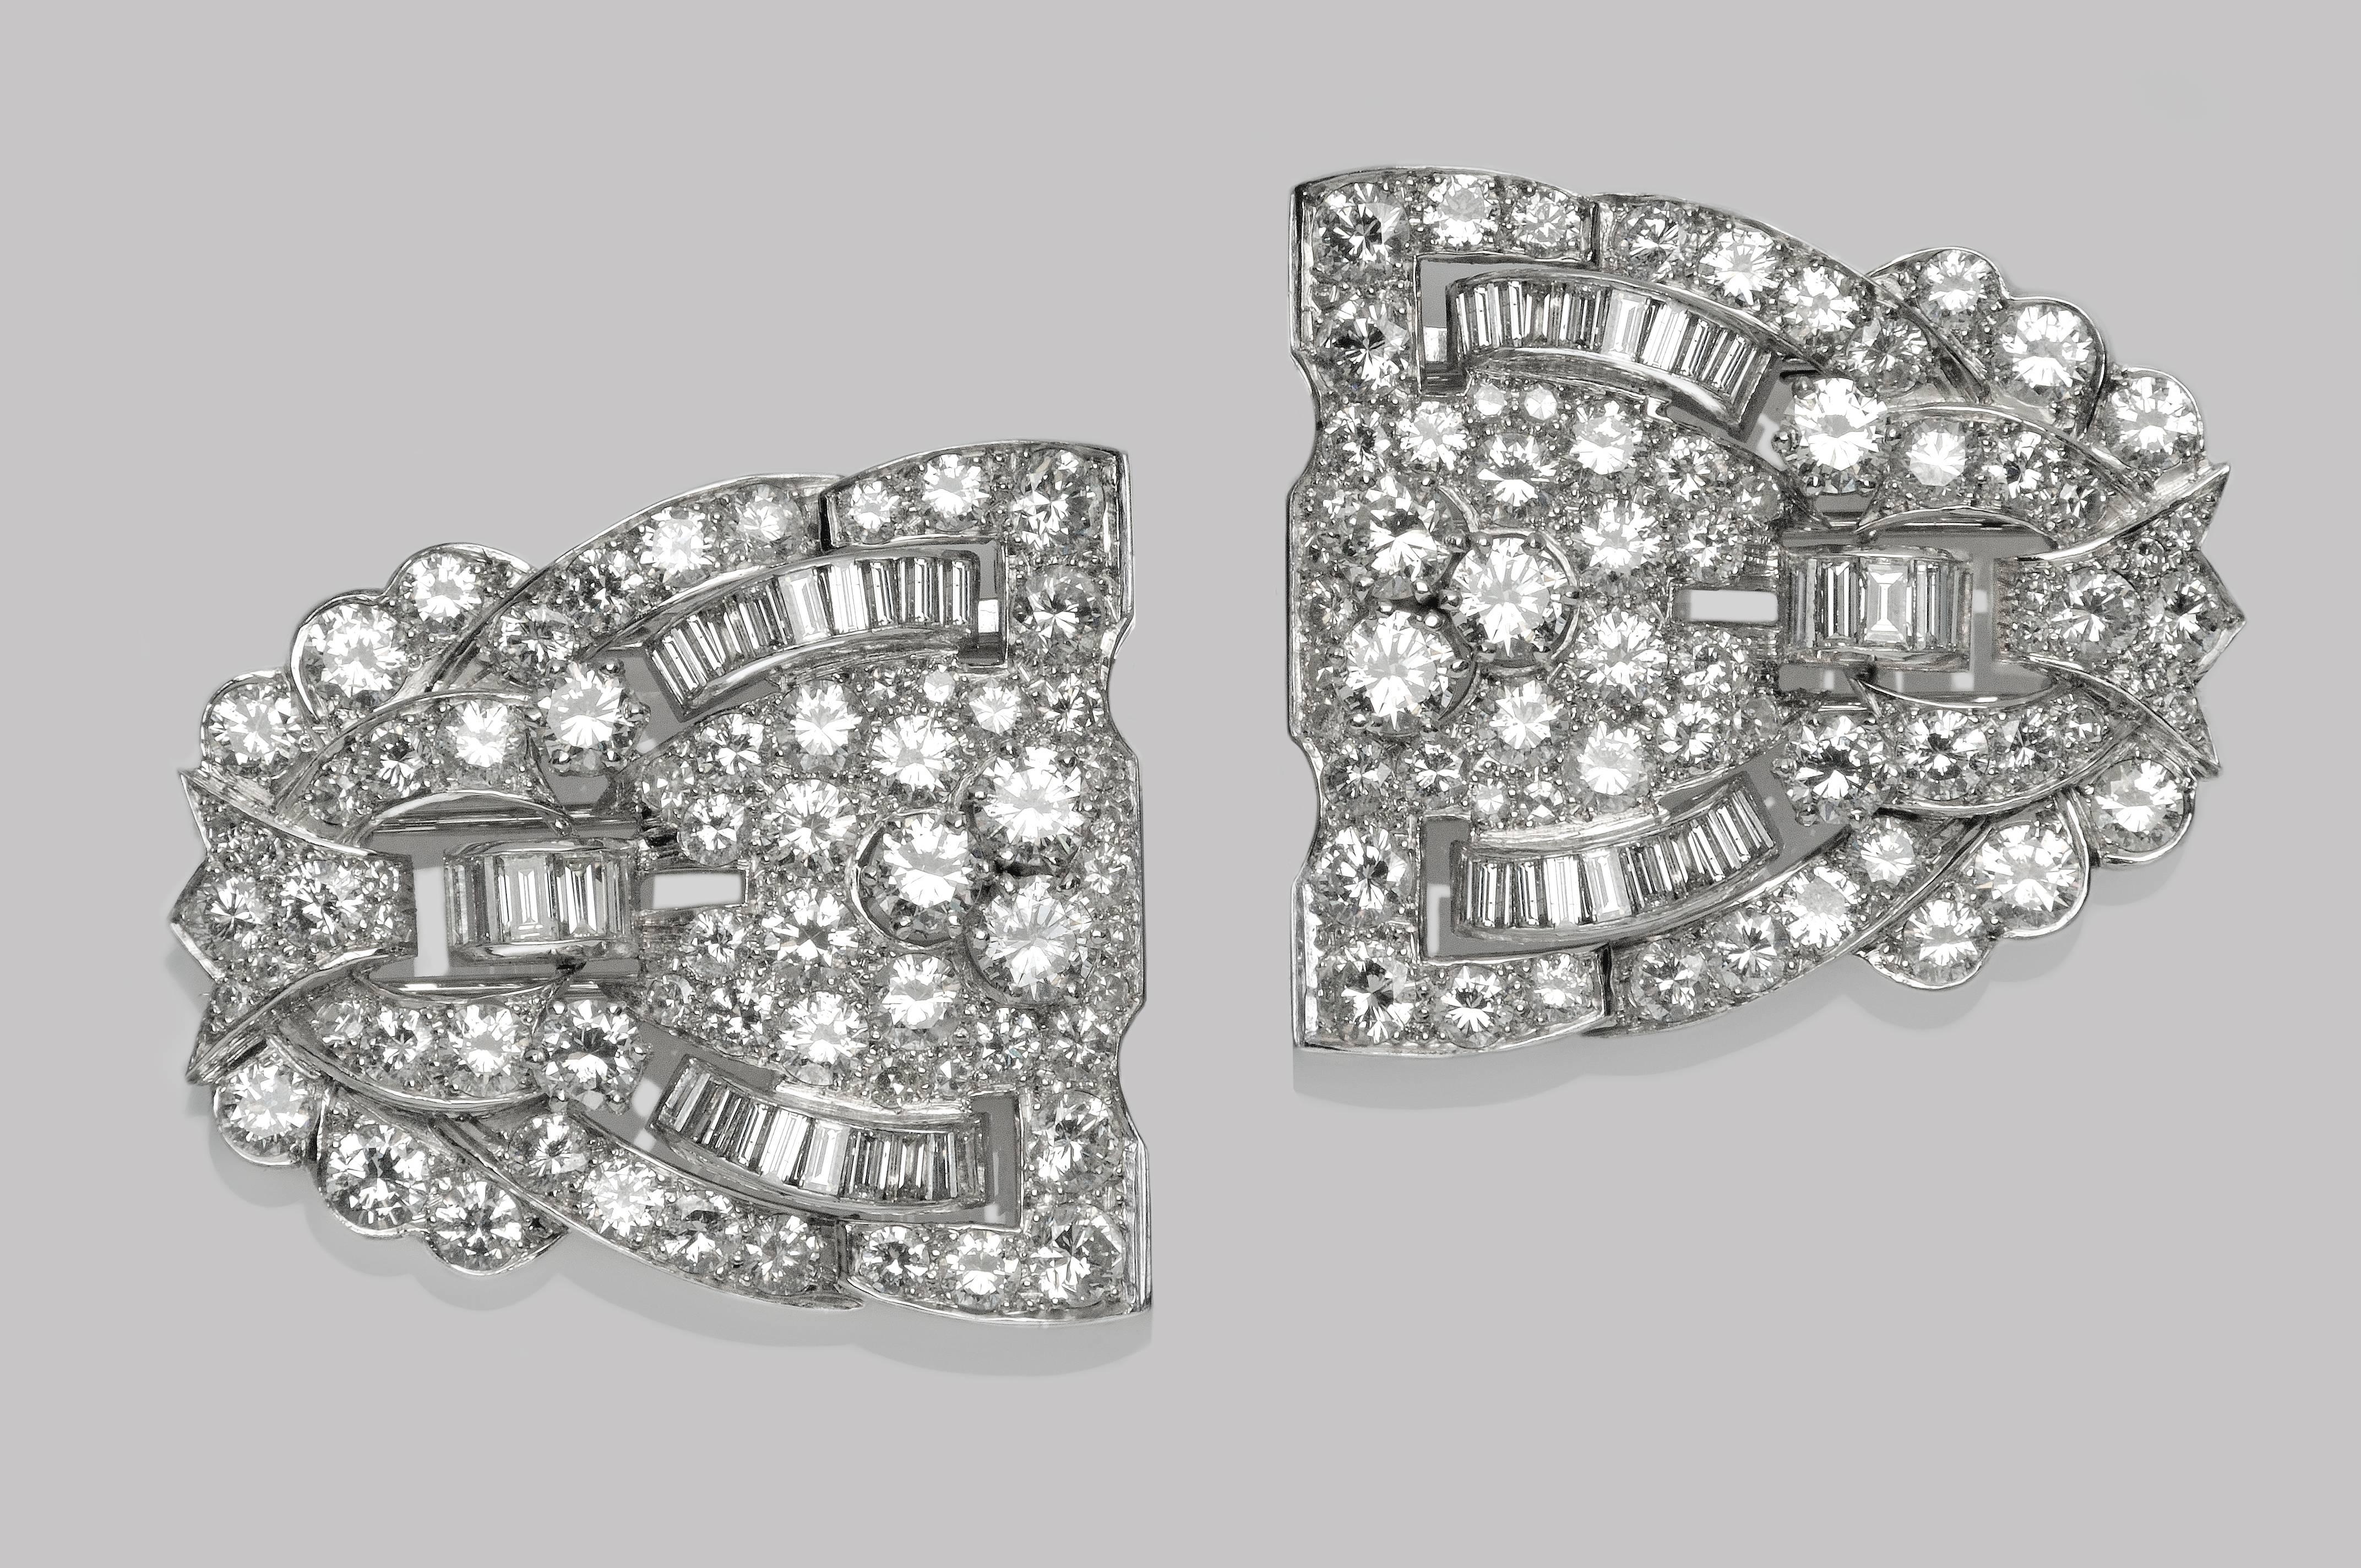 This Double Clip Brooch has a beautiful geometric design. It´s made of Platinum with brillant cut-diamonds and baguettes weighing 20 carats aprox. This elegant piece can be worn as a single brooch, or two separate and distinct clips.
French assay